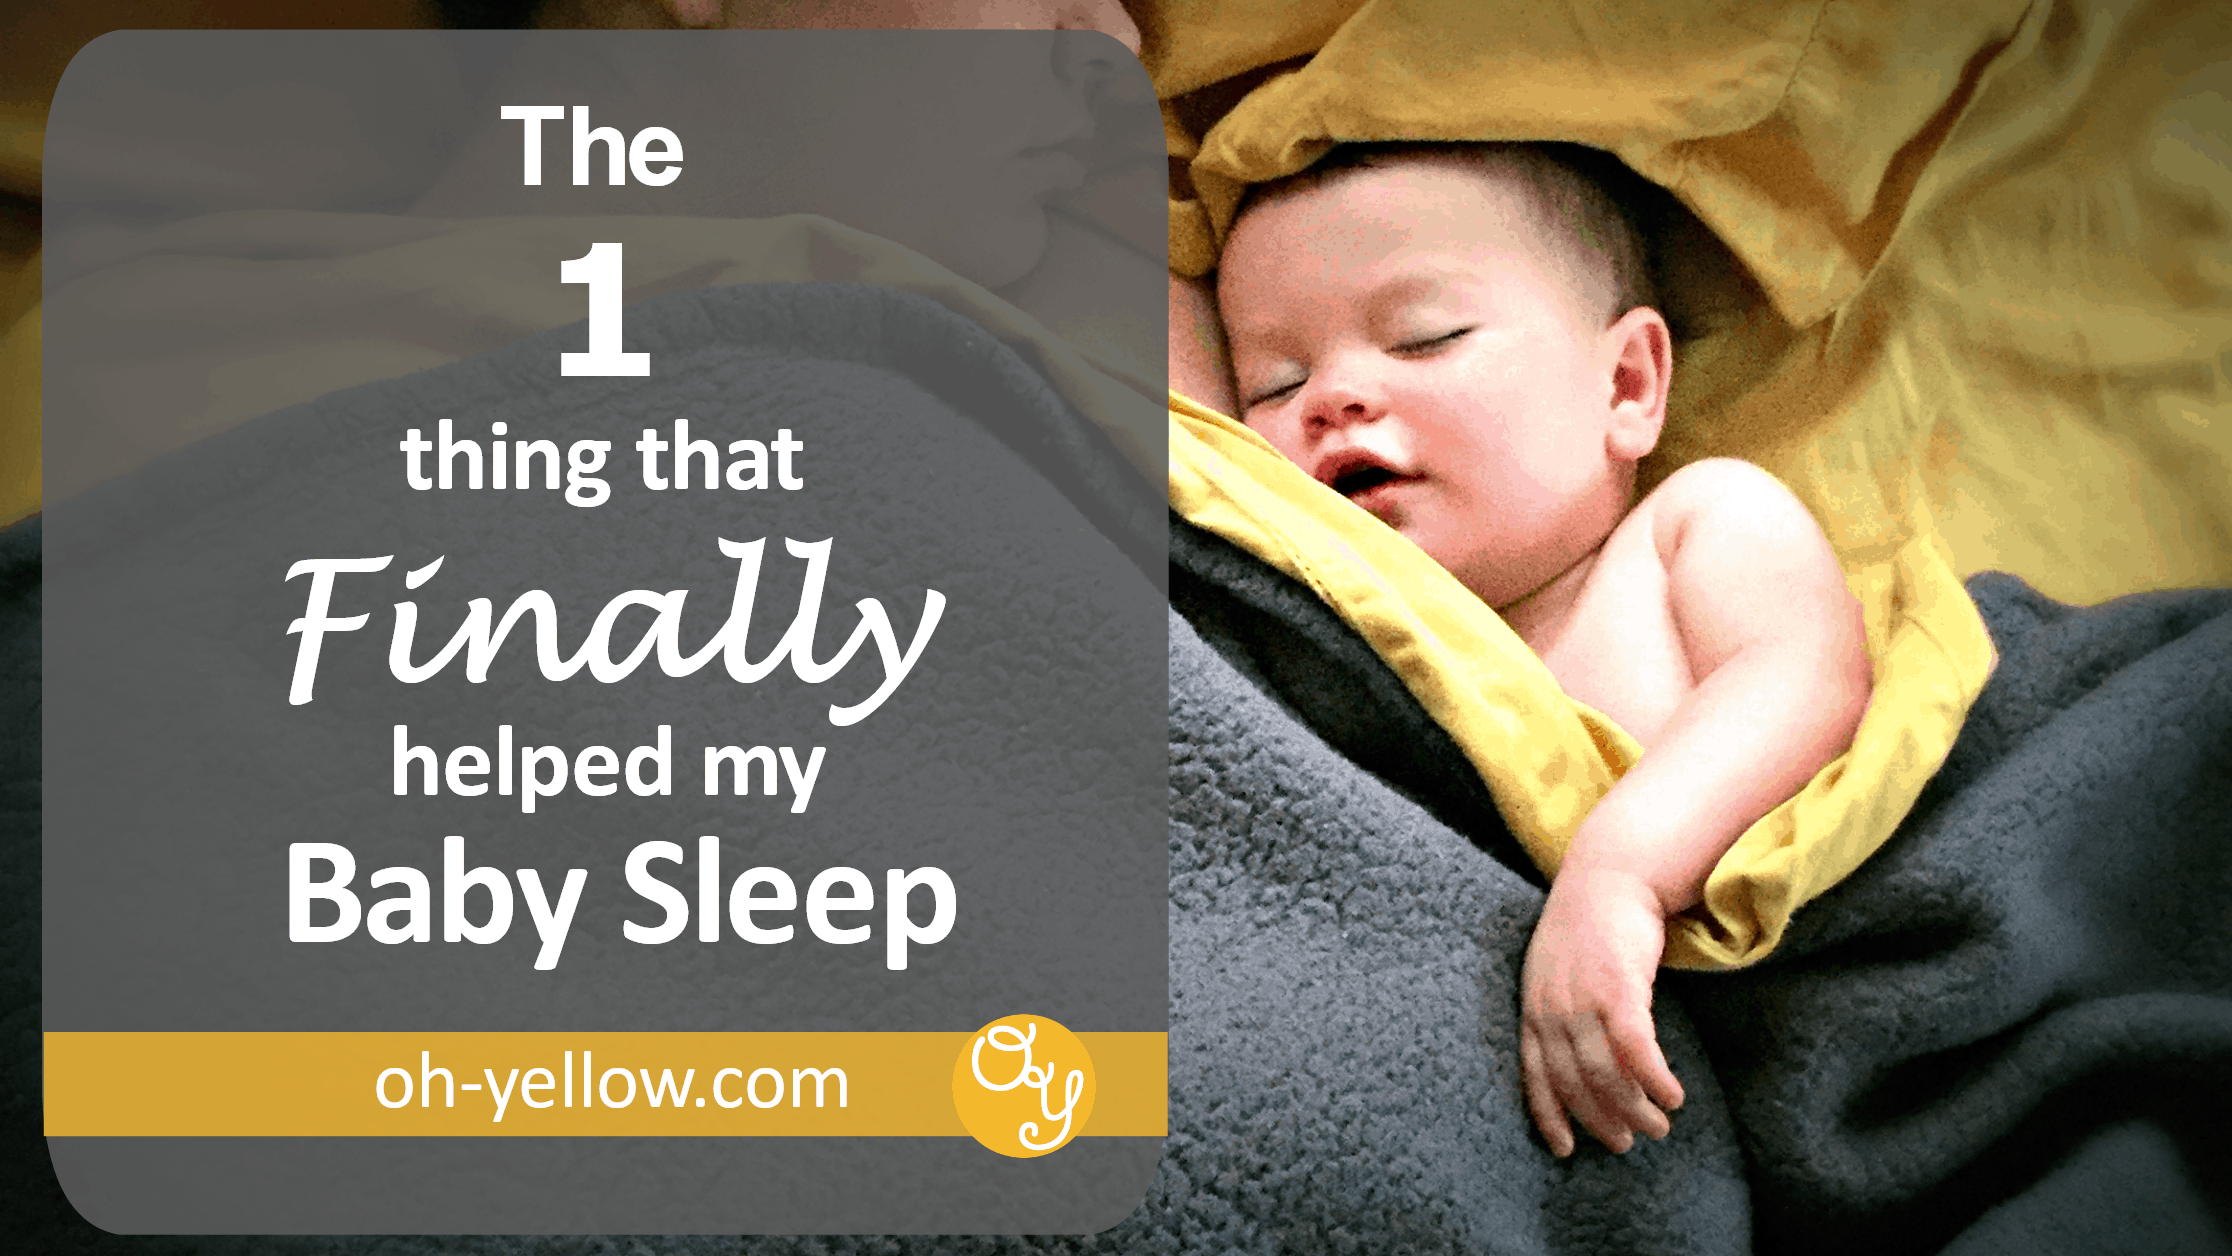 Baby sleep is one of the hardest parts of having a baby! If your baby won't sleep during naps, won't sleep in the crib or won't sleep through the night, these great tips could help. Sometimes sleep training or baby sleep schedules aren't enough, especially after a sleep regression. We tried EVERYTHING and this was the ONLY thing that made a difference. Read my story for ideas on how to help your baby sleep better too...